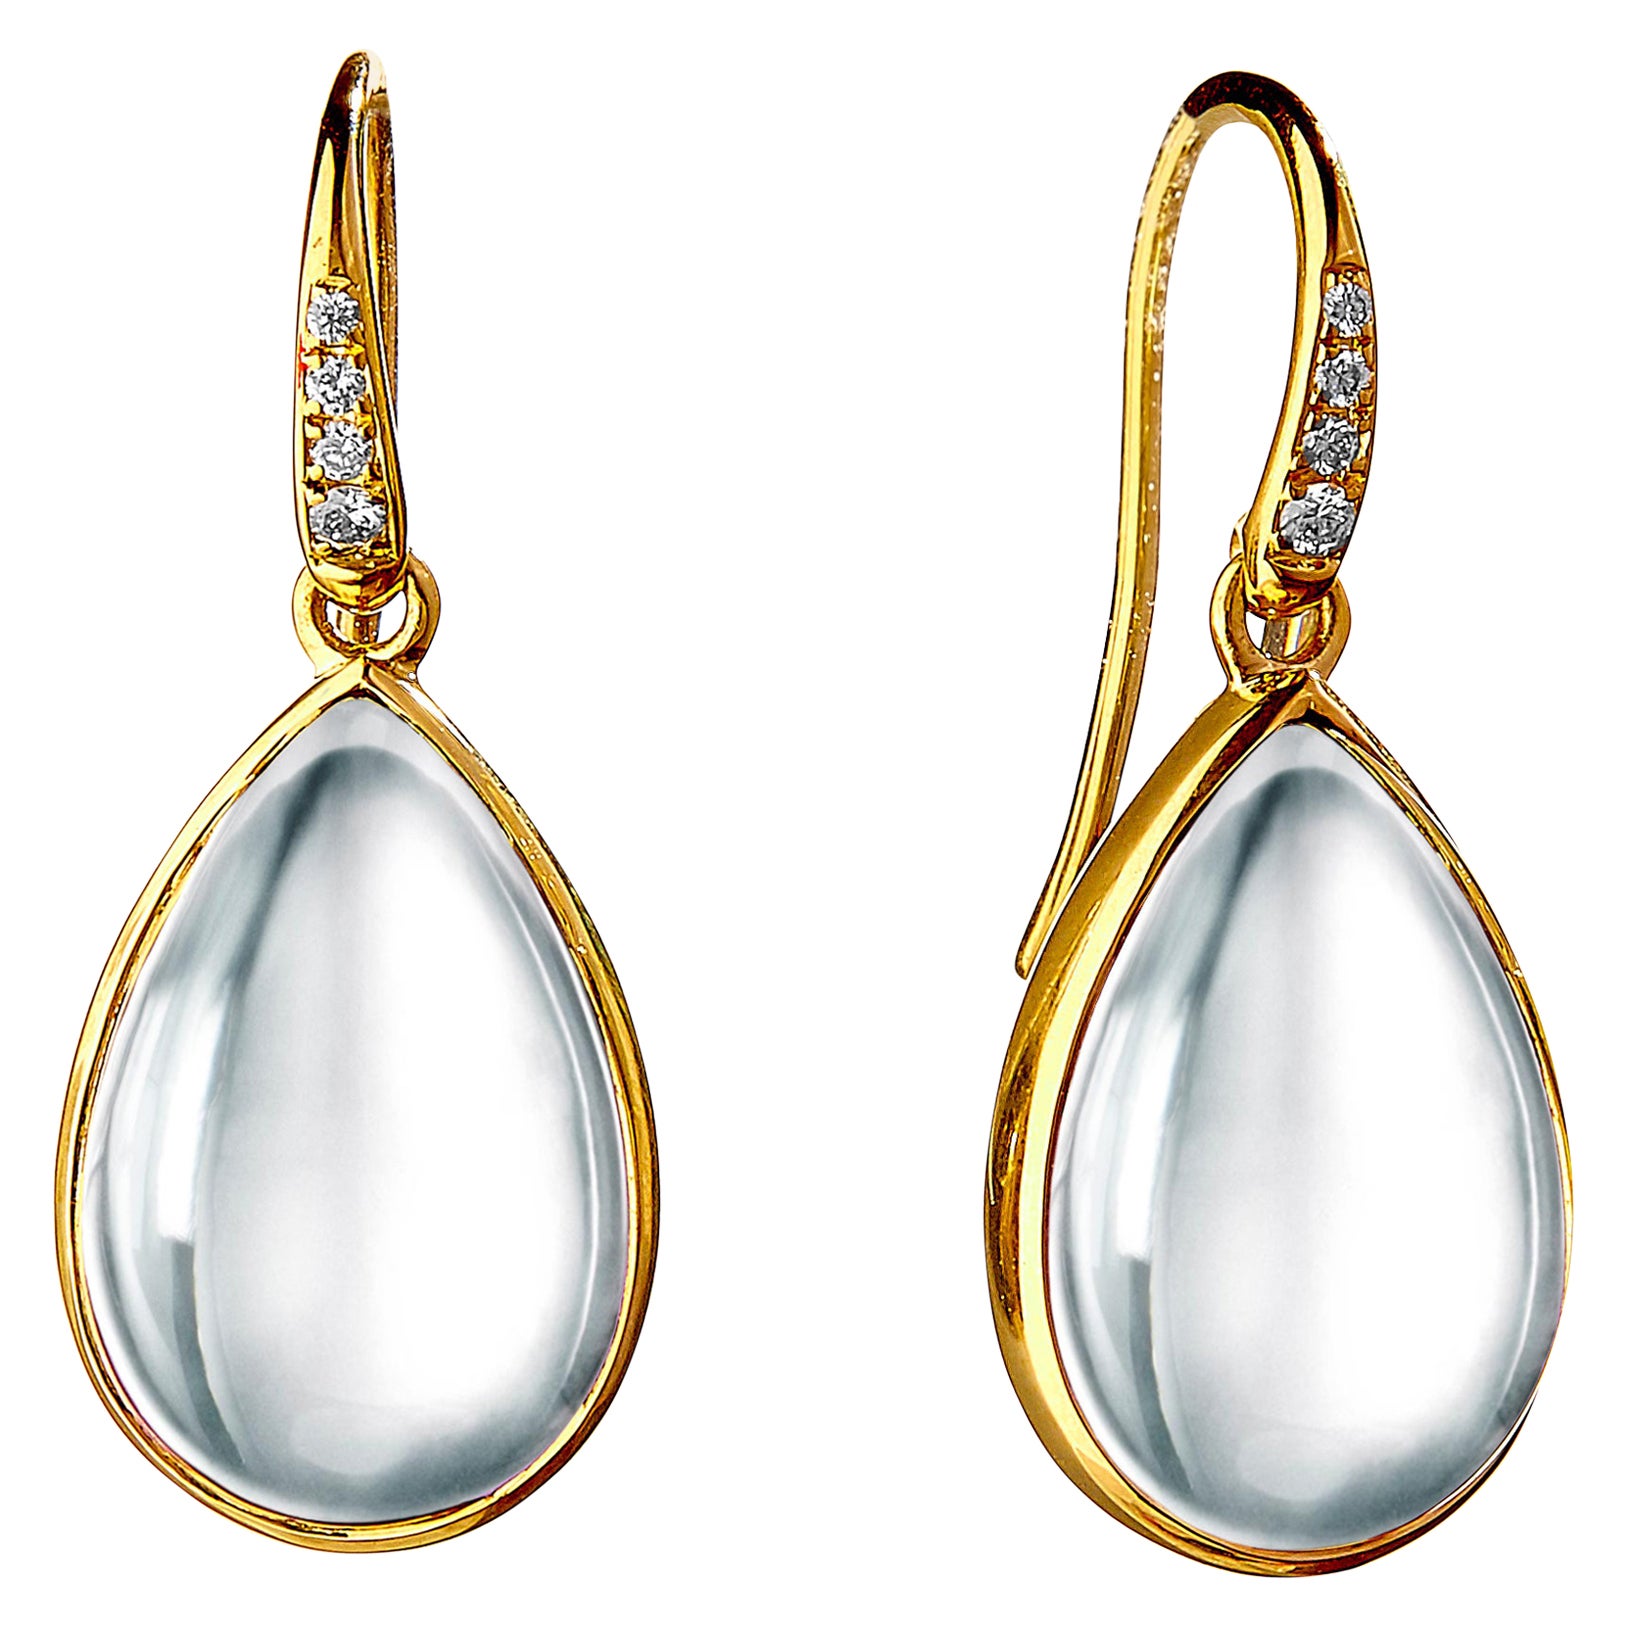 Syna Yellow Gold Rock Crystal Earrings with Diamonds